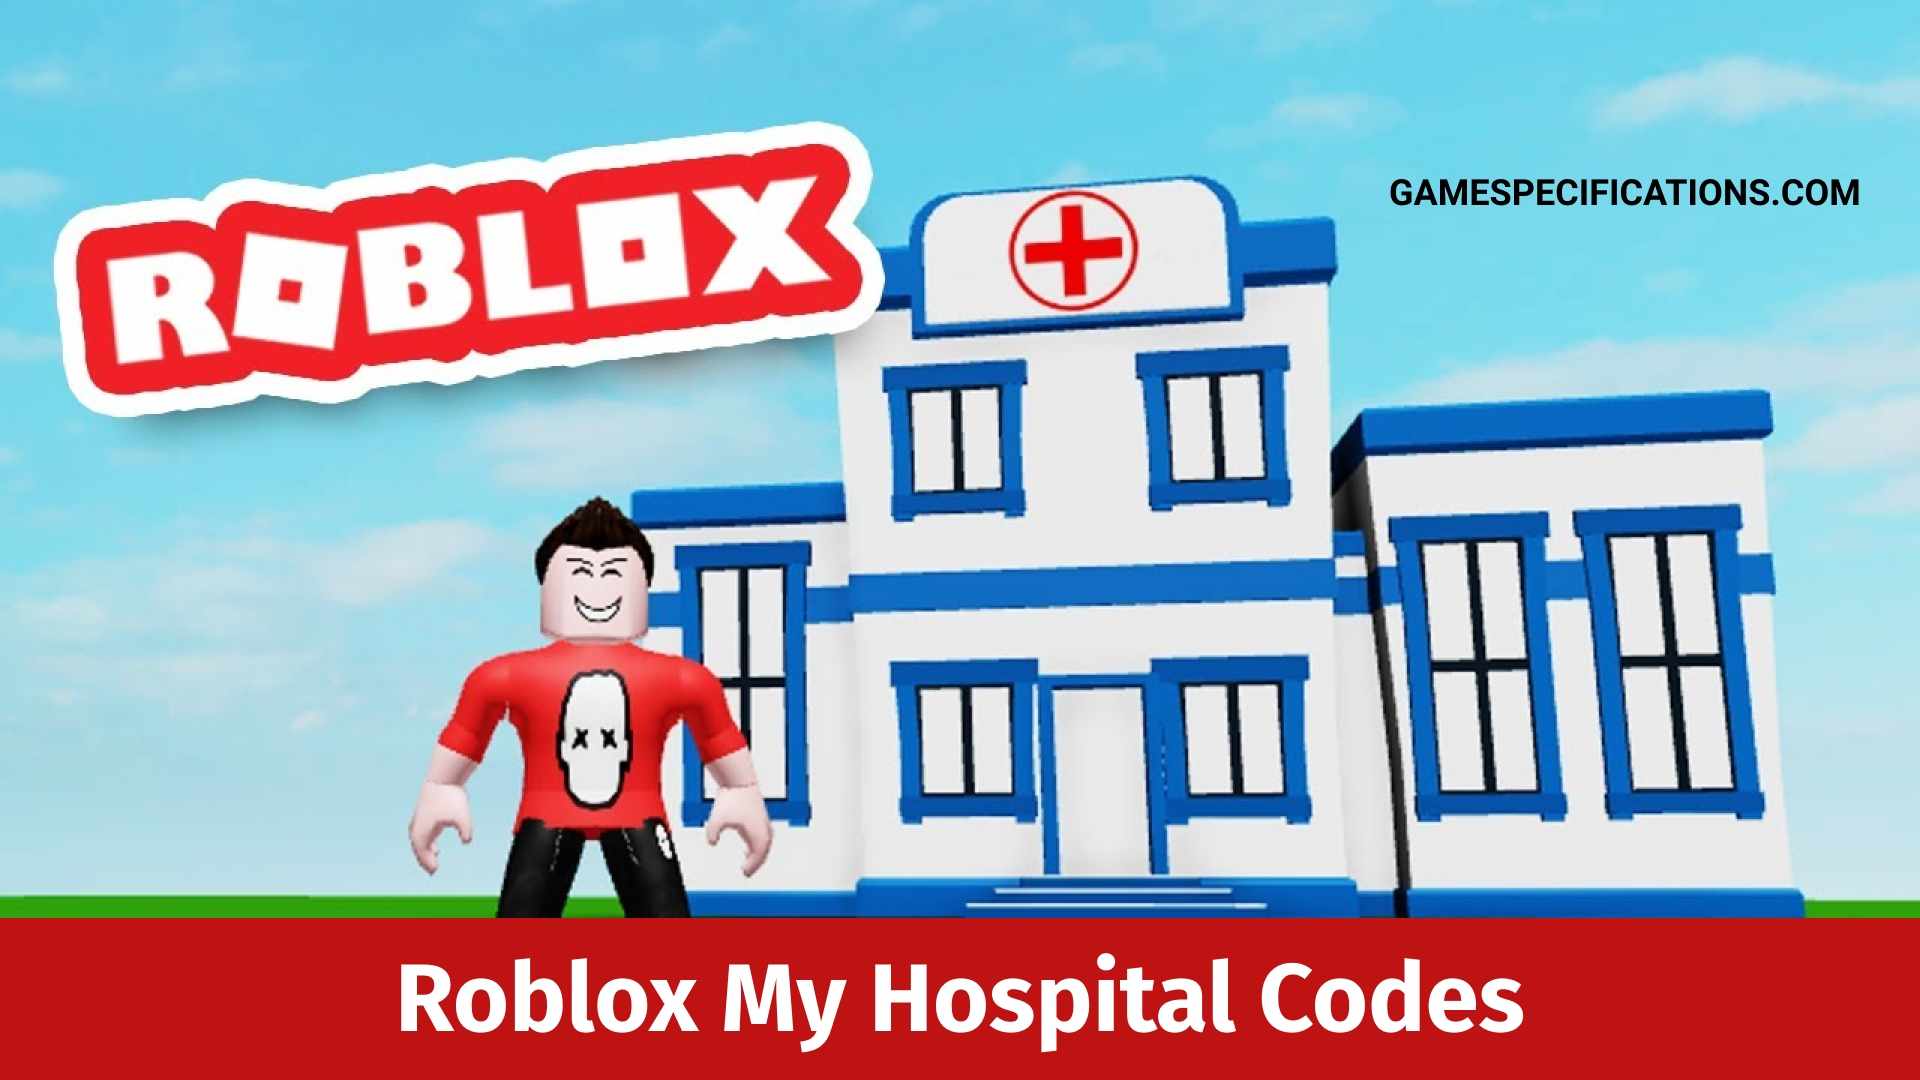 Roblox My Hospital Codes July 2021 Game Specifications - my activation code for roblox cash got ruined